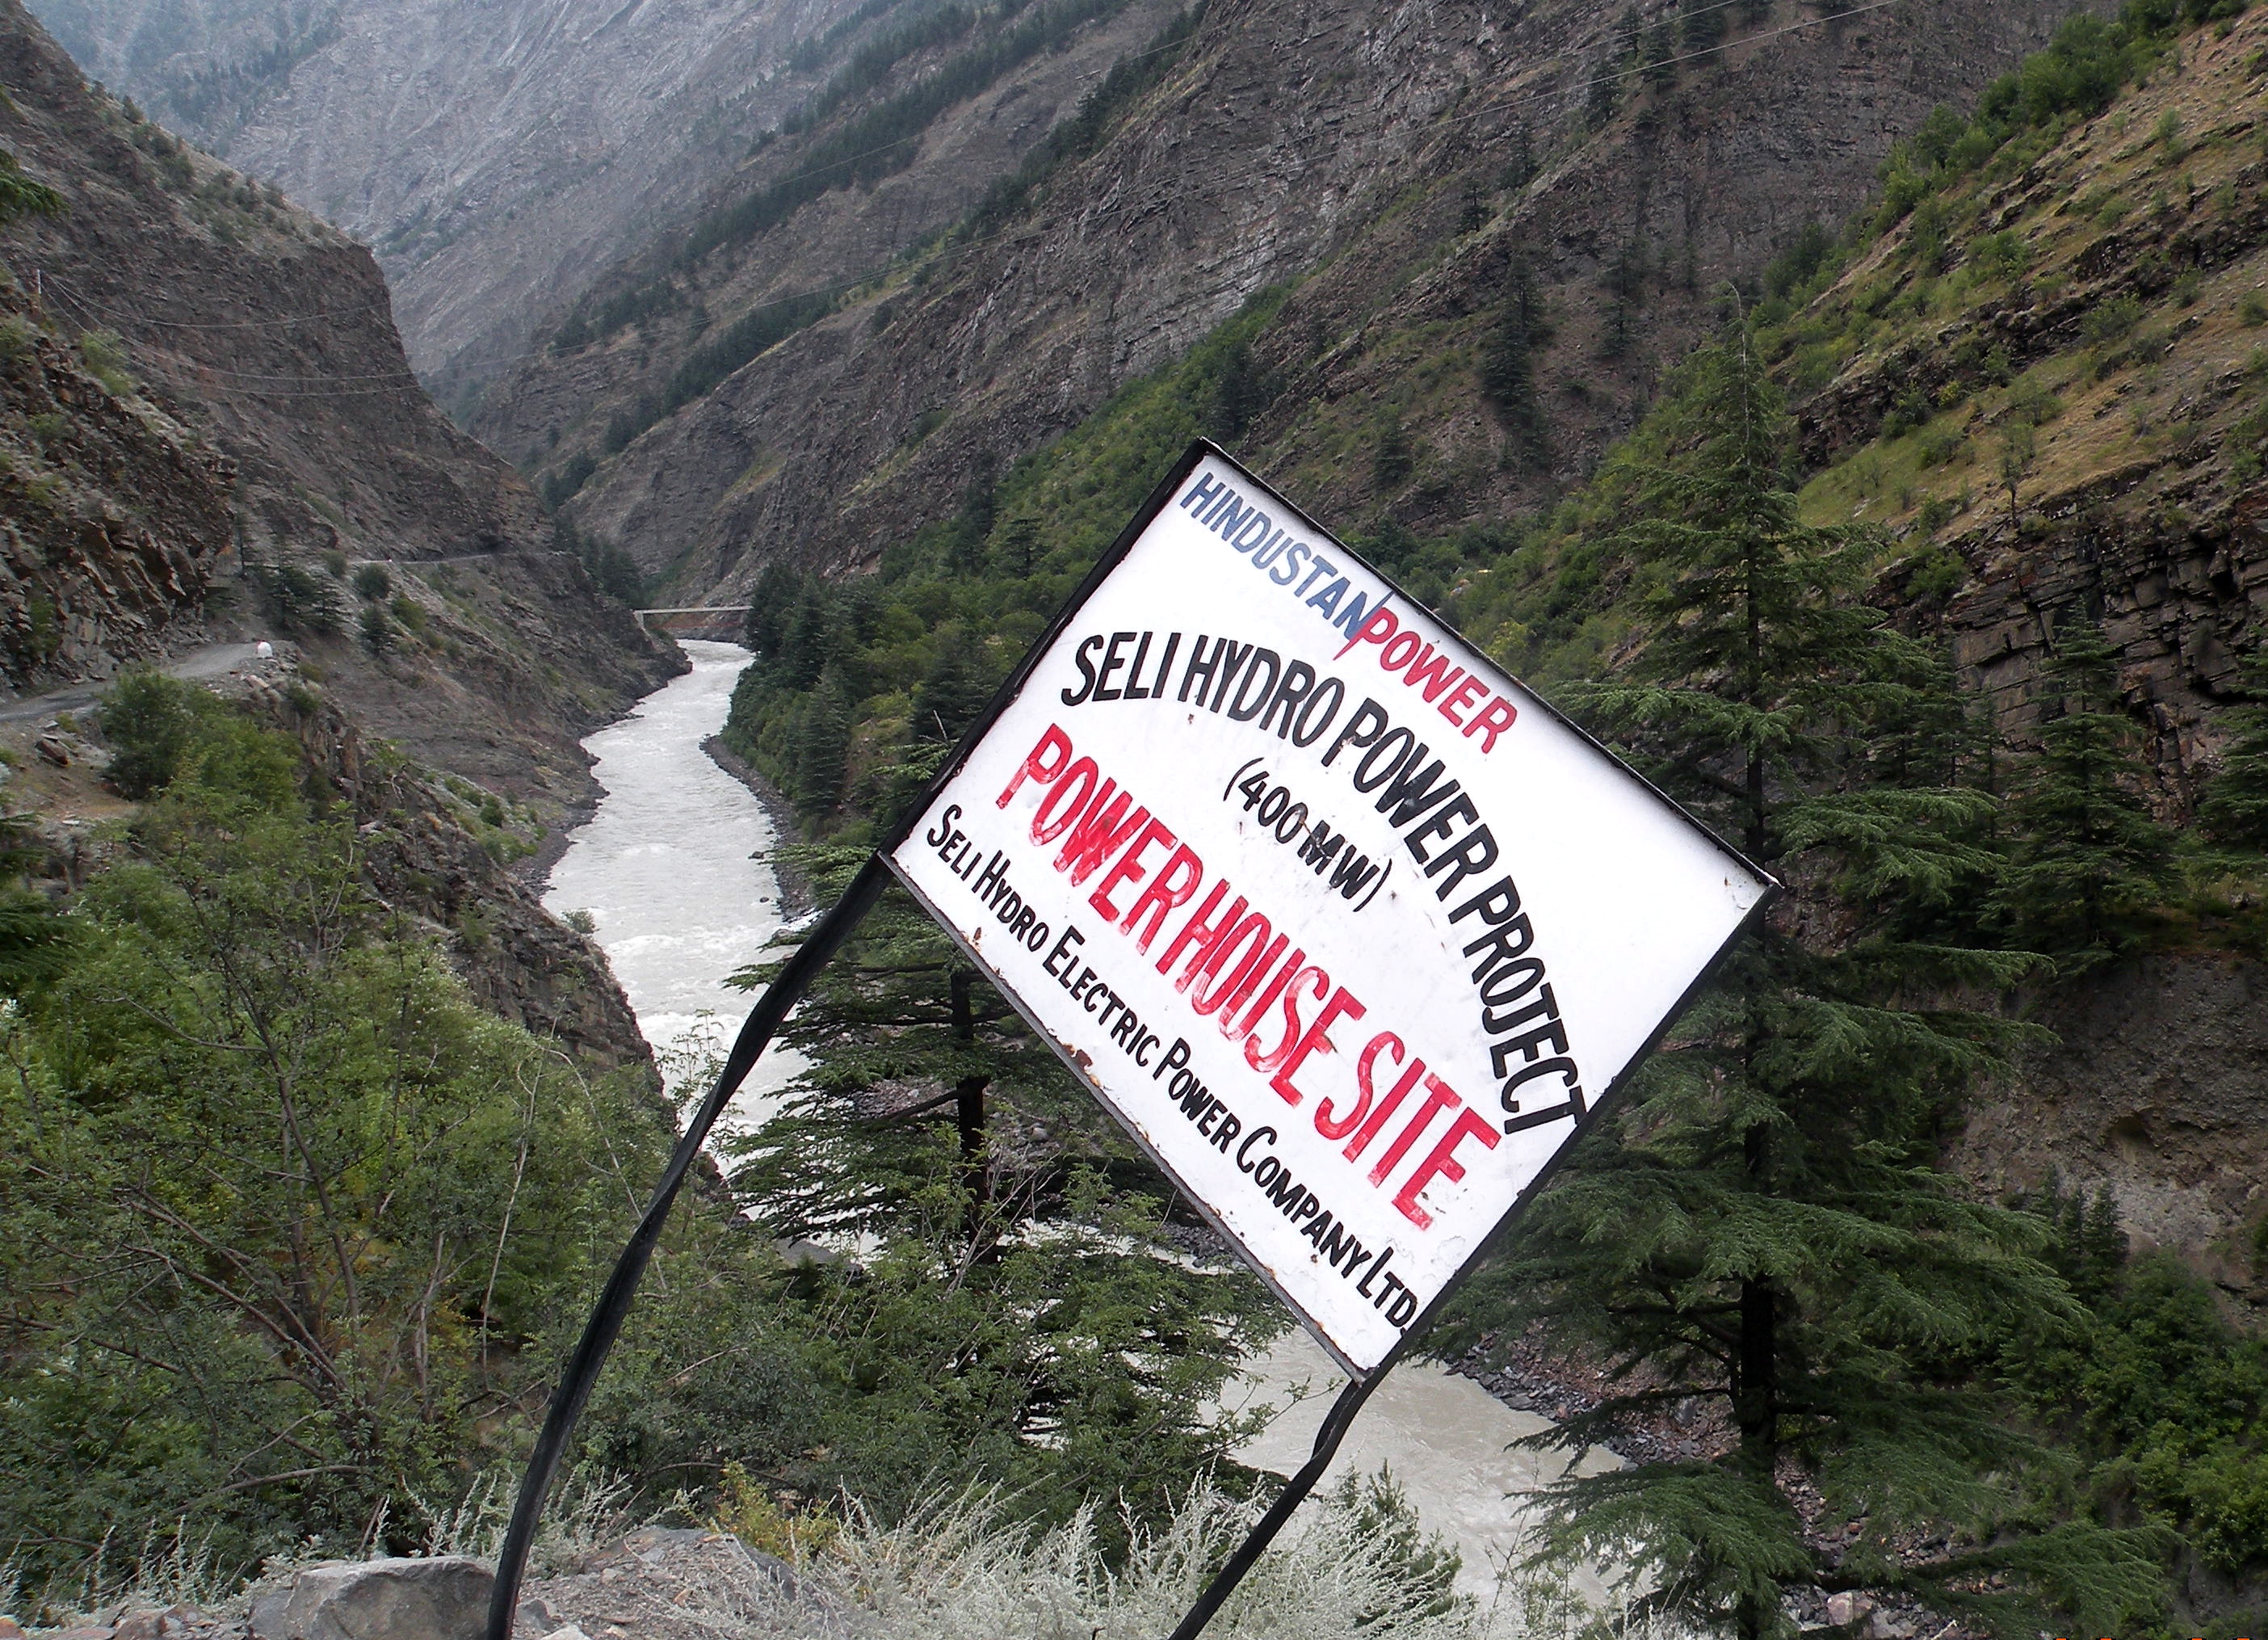 Power house site of the proposed SELI project which is going to affect the udaipur region of Lahaul.                                                                                                                                                   Pic Date : 26/08/2014